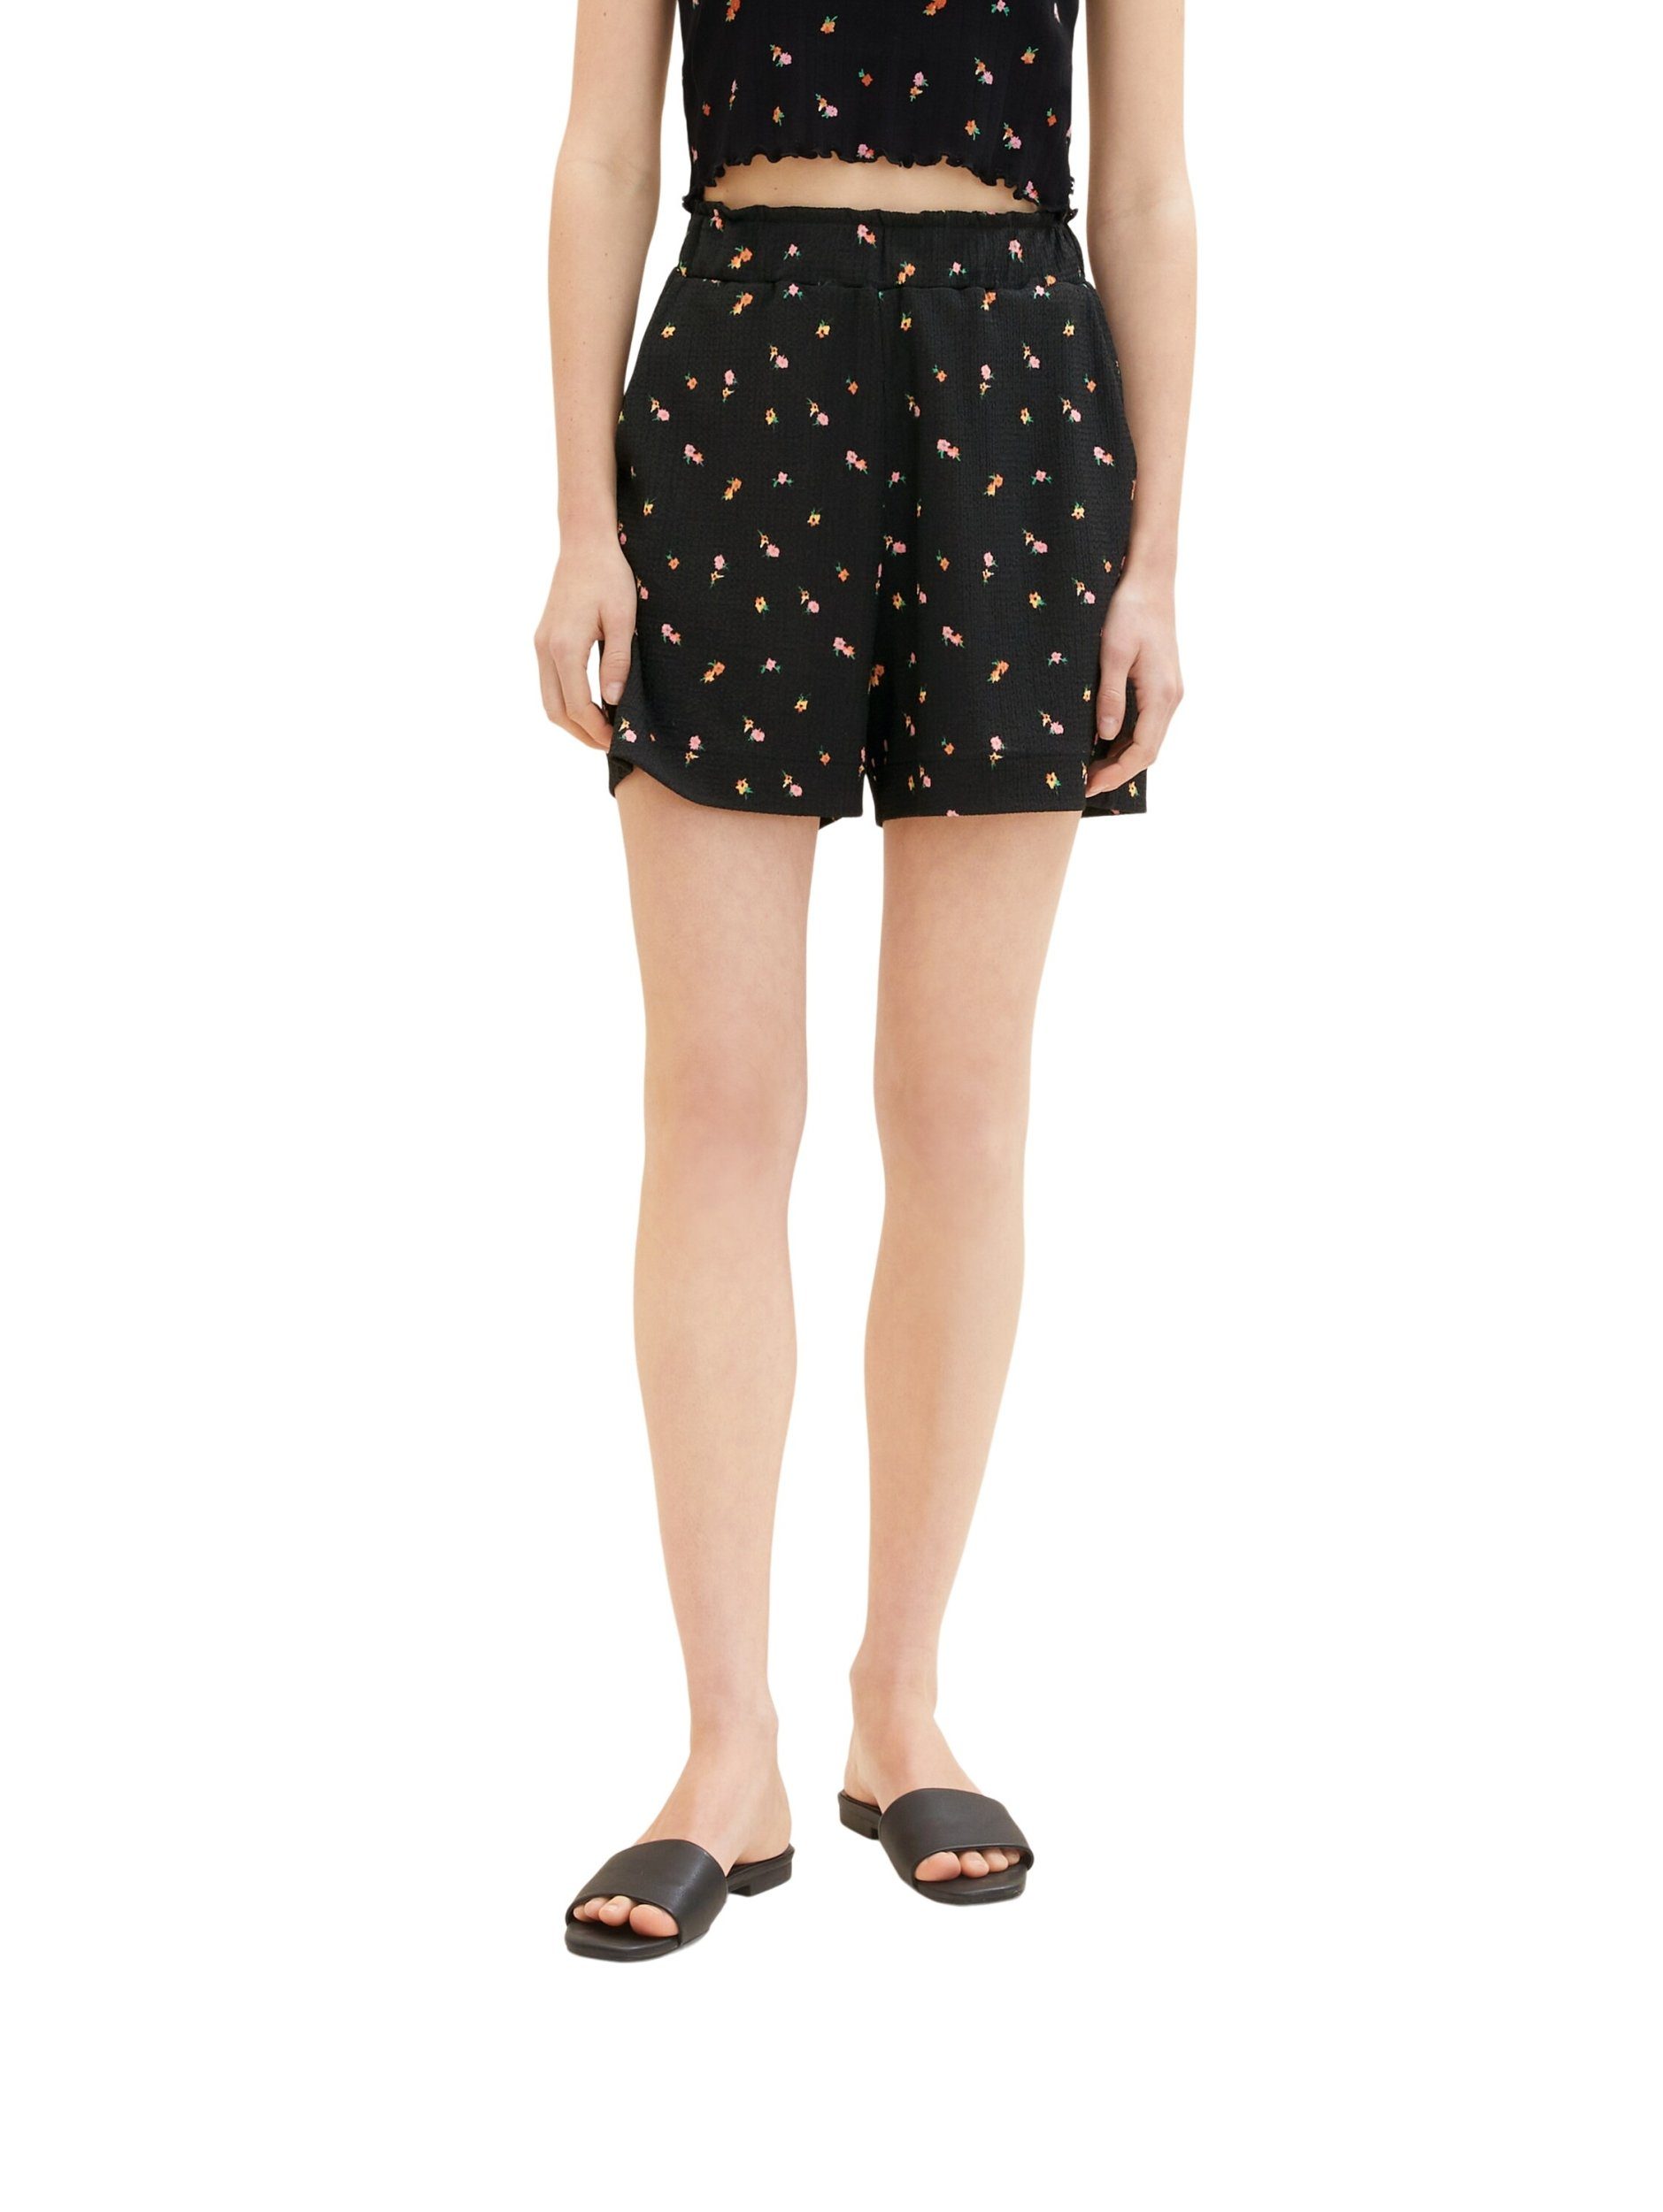 Shorts print black structured TOM Easy flower shorts small 31950 TAILOR